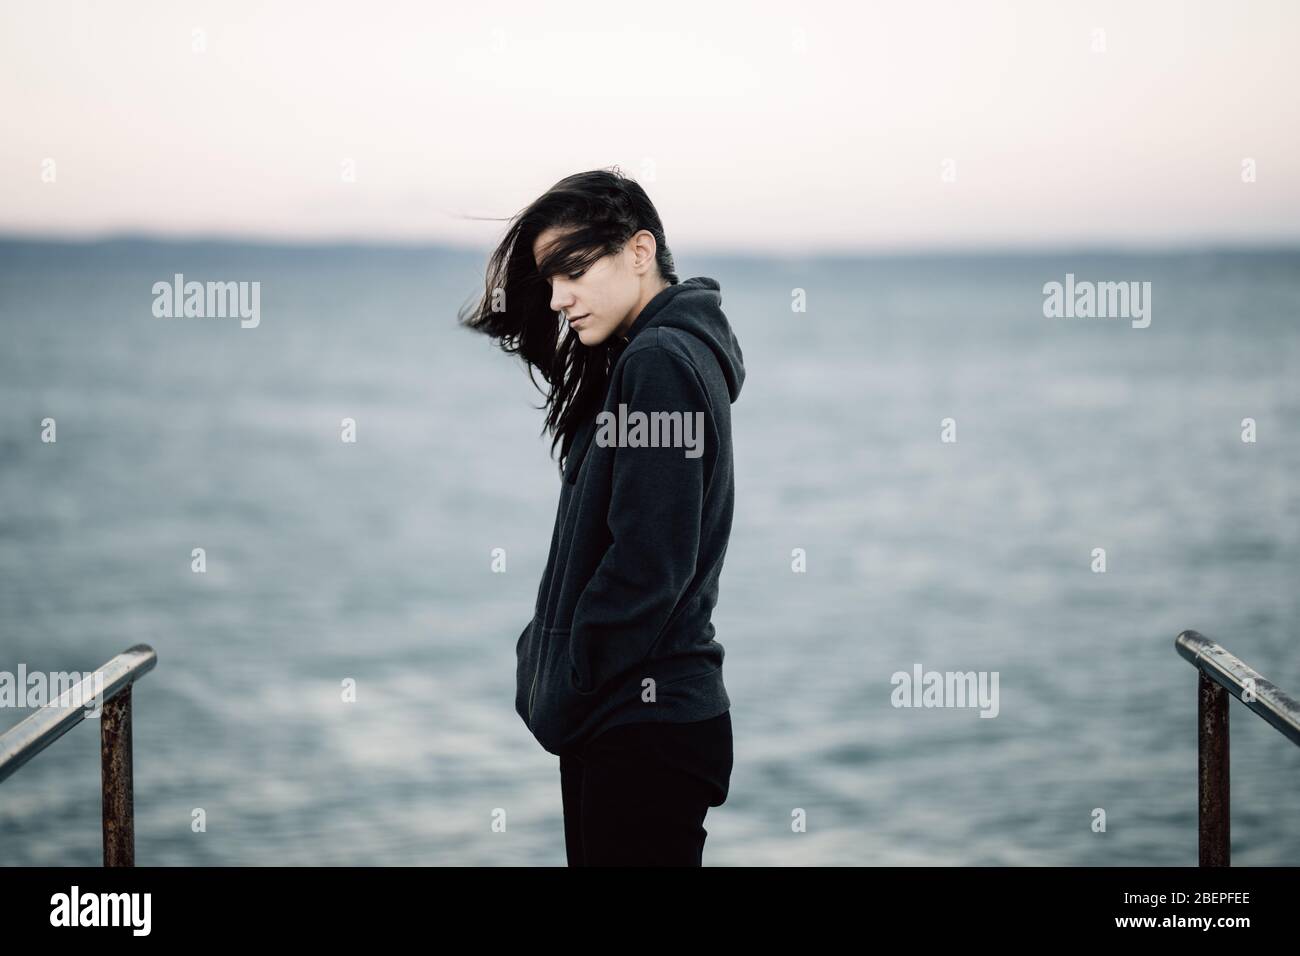 Stressed sad woman in bad mood overthinking problems,looking at the sea/ocean.Person being alone.Social distancing loneliness.Emotional challenge and Stock Photo